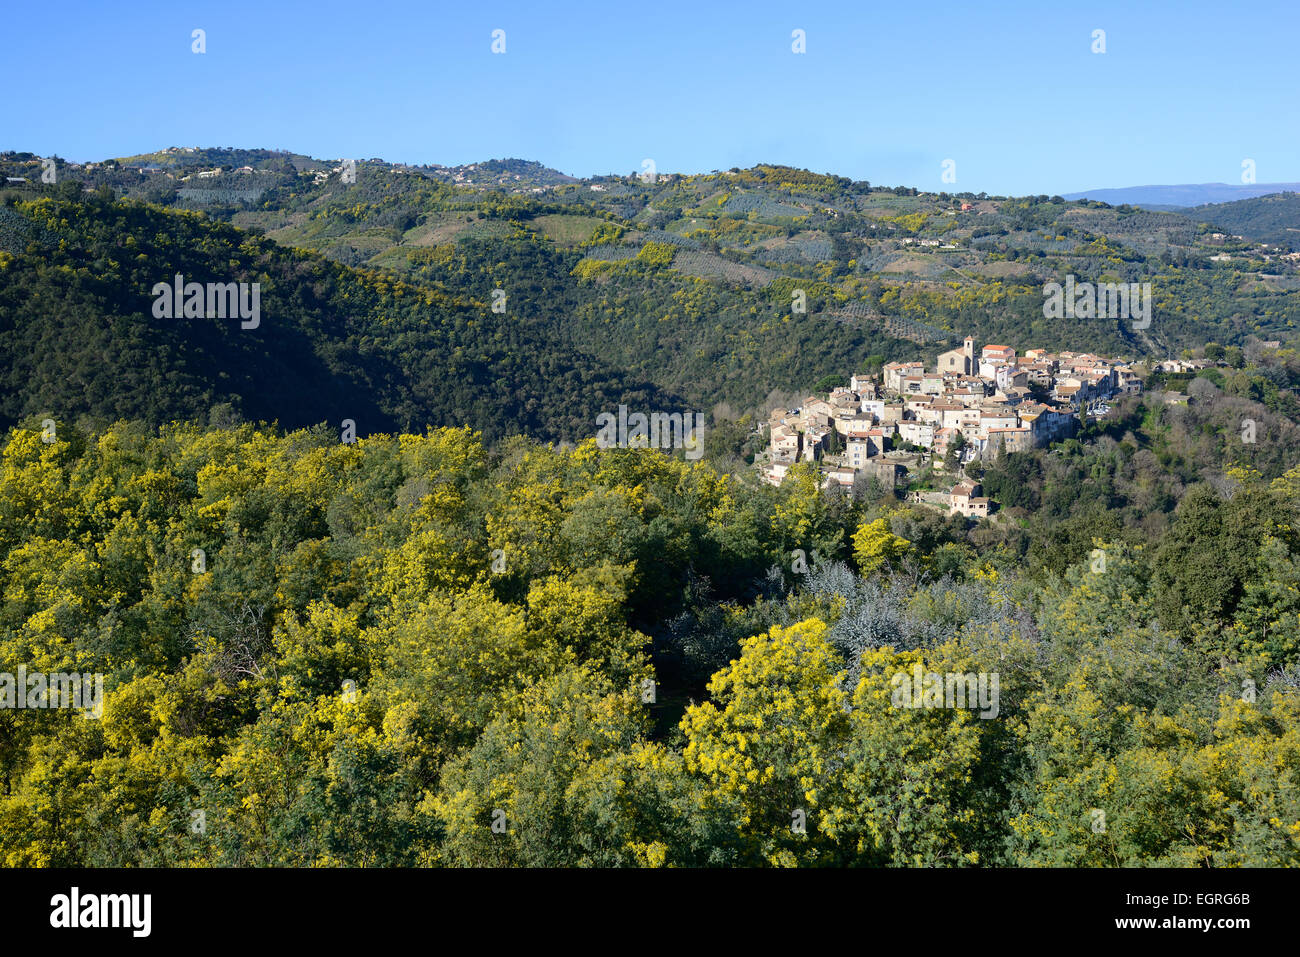 Perched medieval village surrounded by mimosa trees in full bloom in winter. Auribeau-sur-Siagne, Alpes-Maritimes, French Riviera, France. Stock Photo